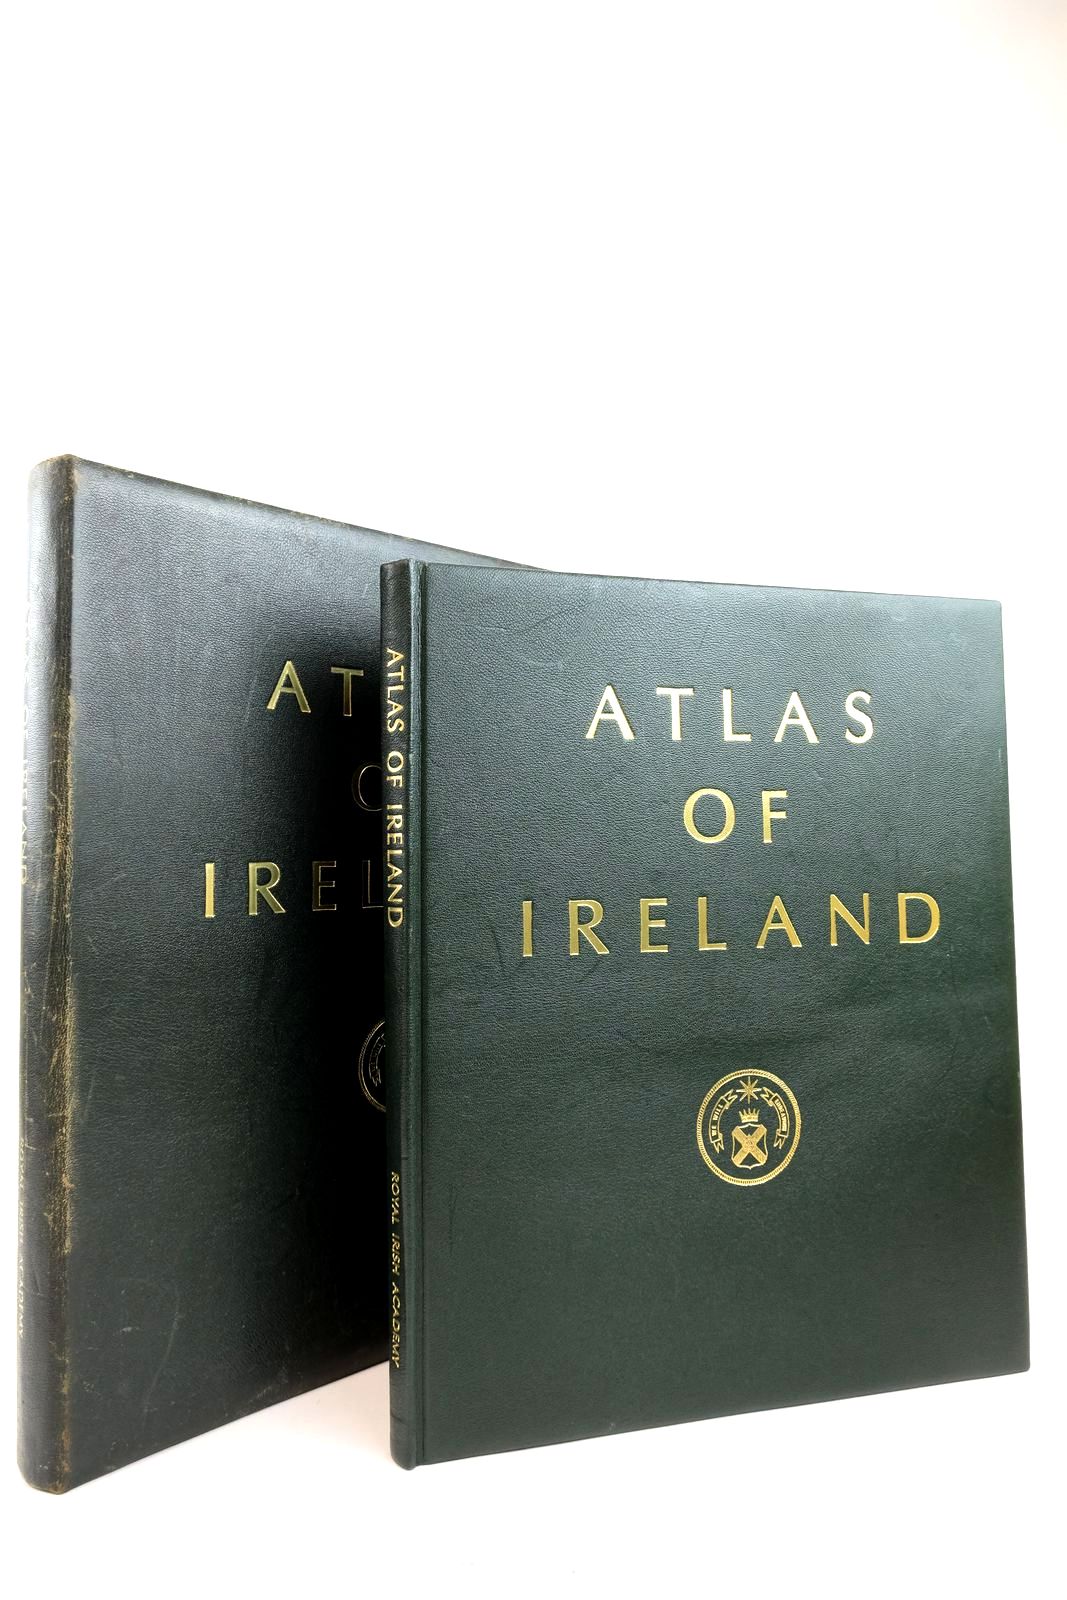 Photo of ATLAS OF IRELAND written by Mitchell, G.F. Haughton, J.P. published by Royal Irish Academy (STOCK CODE: 2140854)  for sale by Stella & Rose's Books